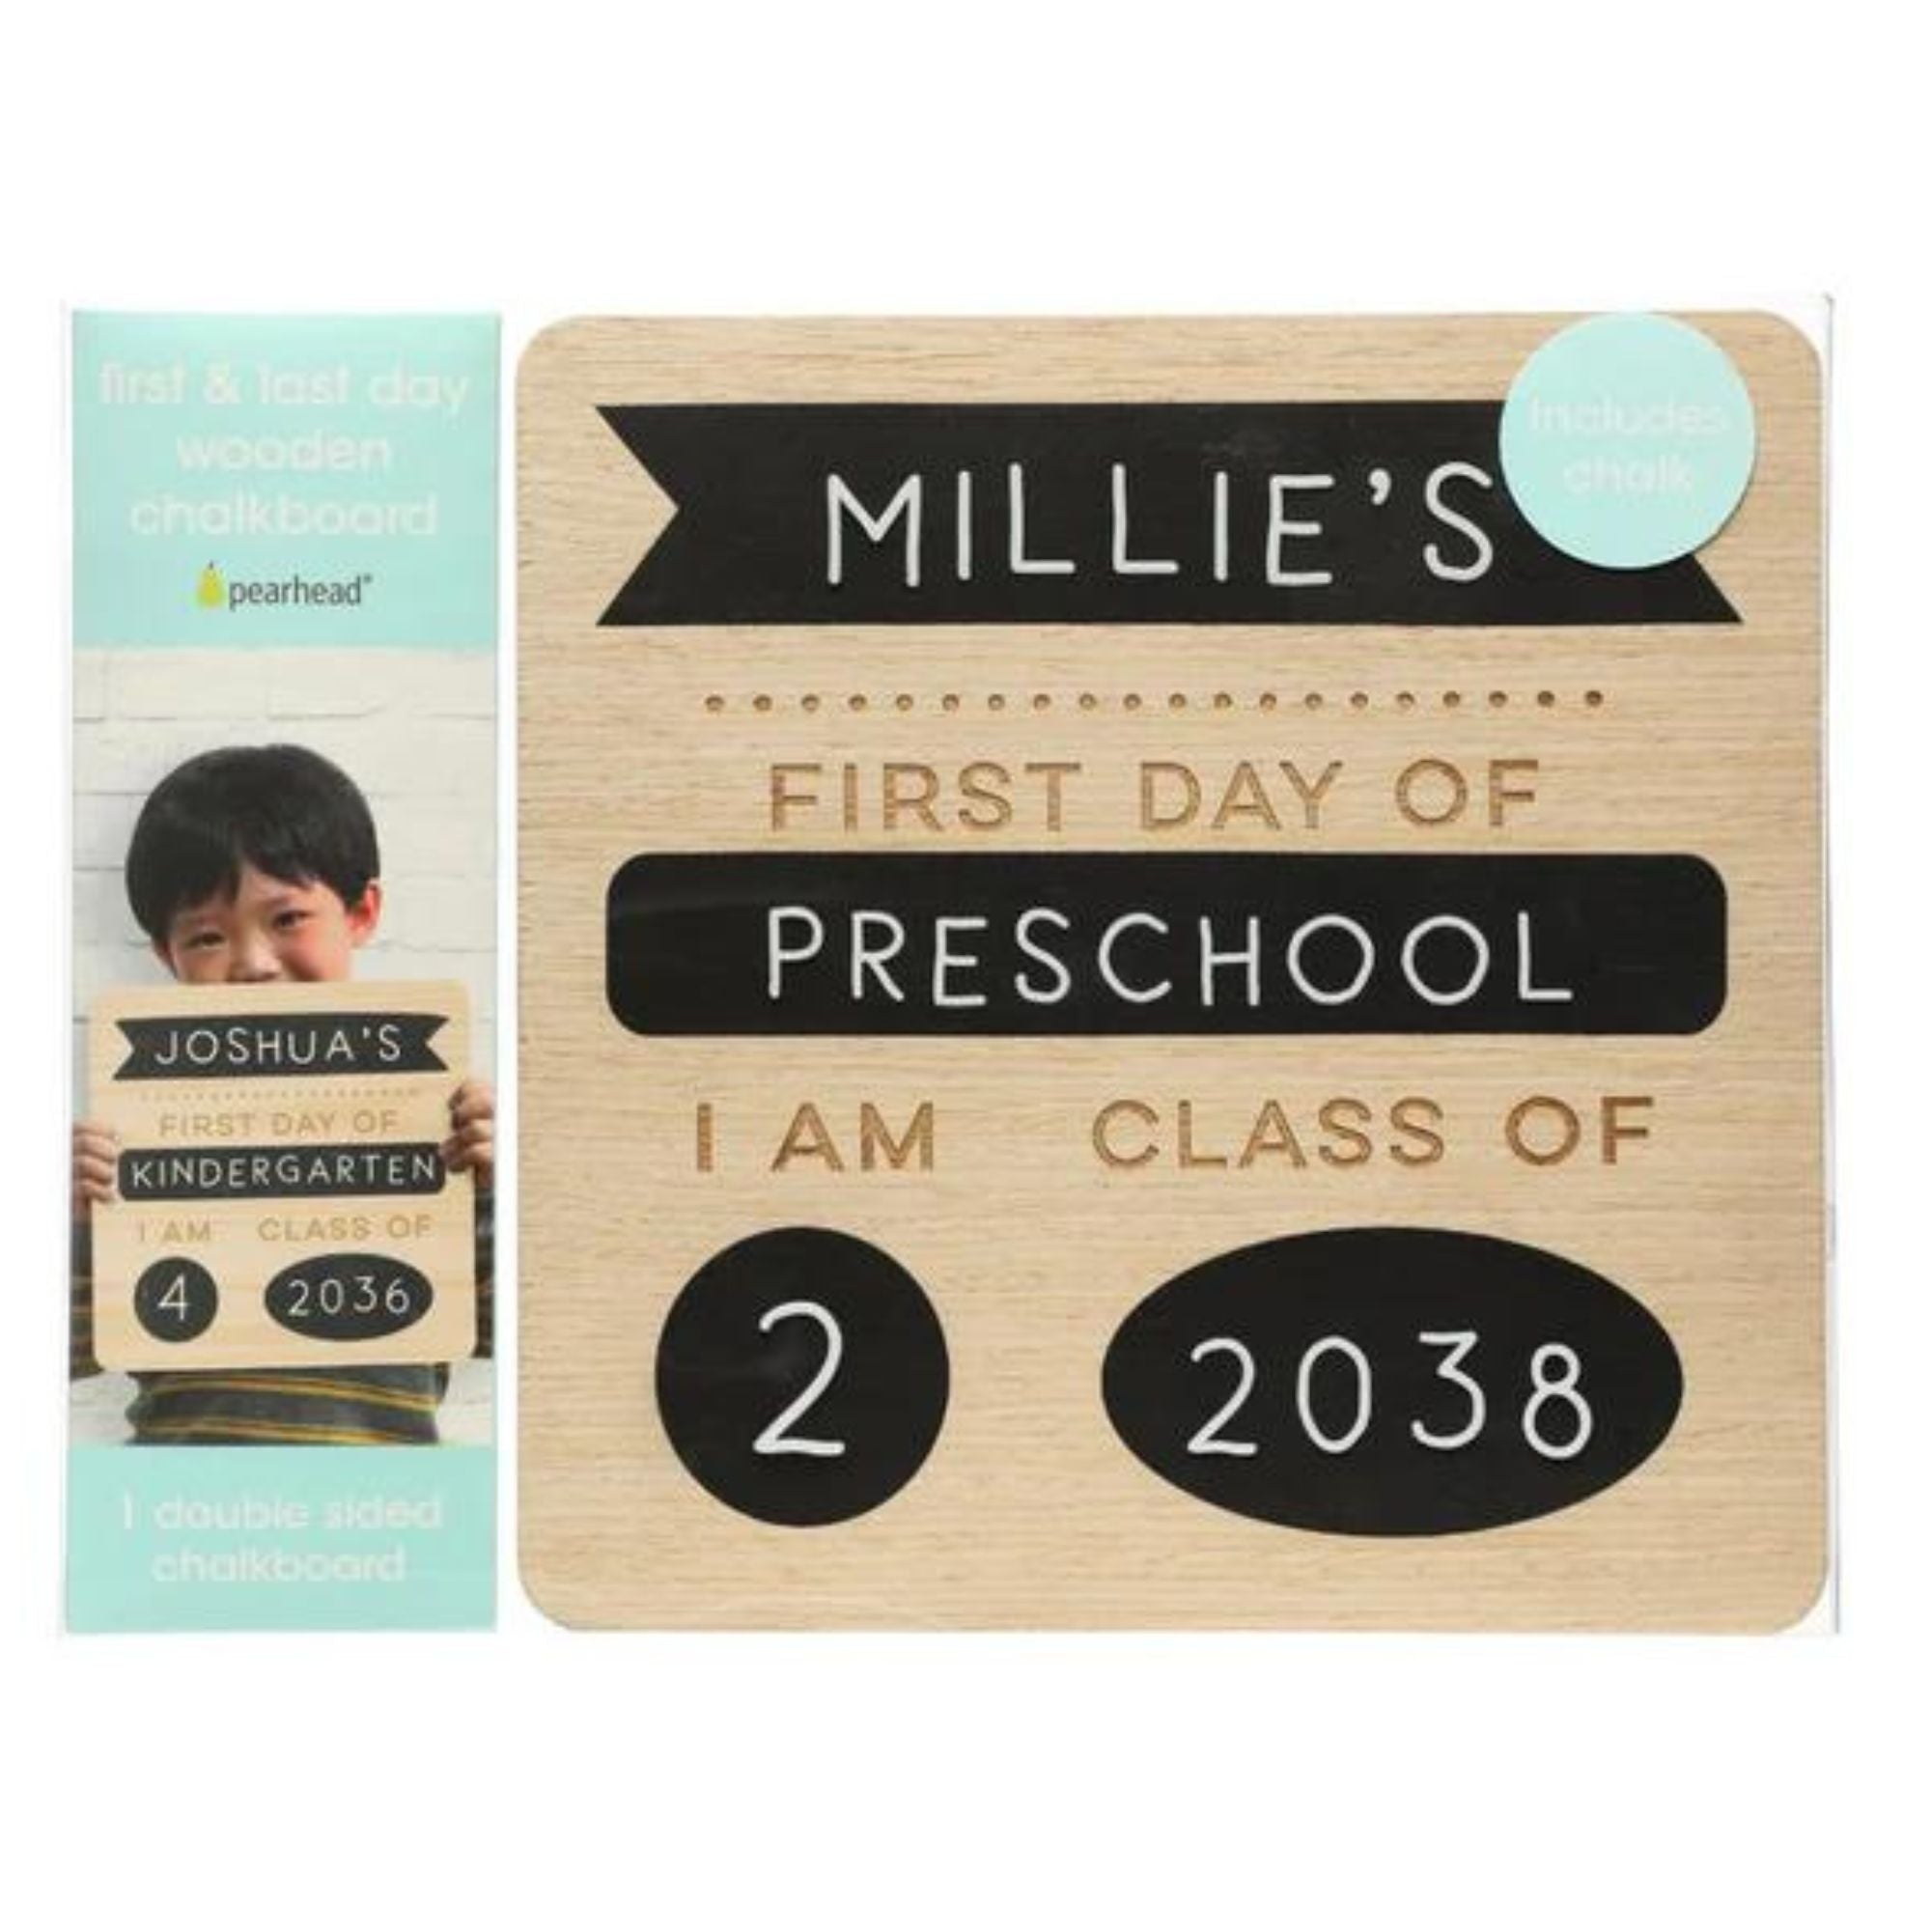 Pearhead Frst & Last Day Wooden Chalkboard - Tiny Tots Baby Store 